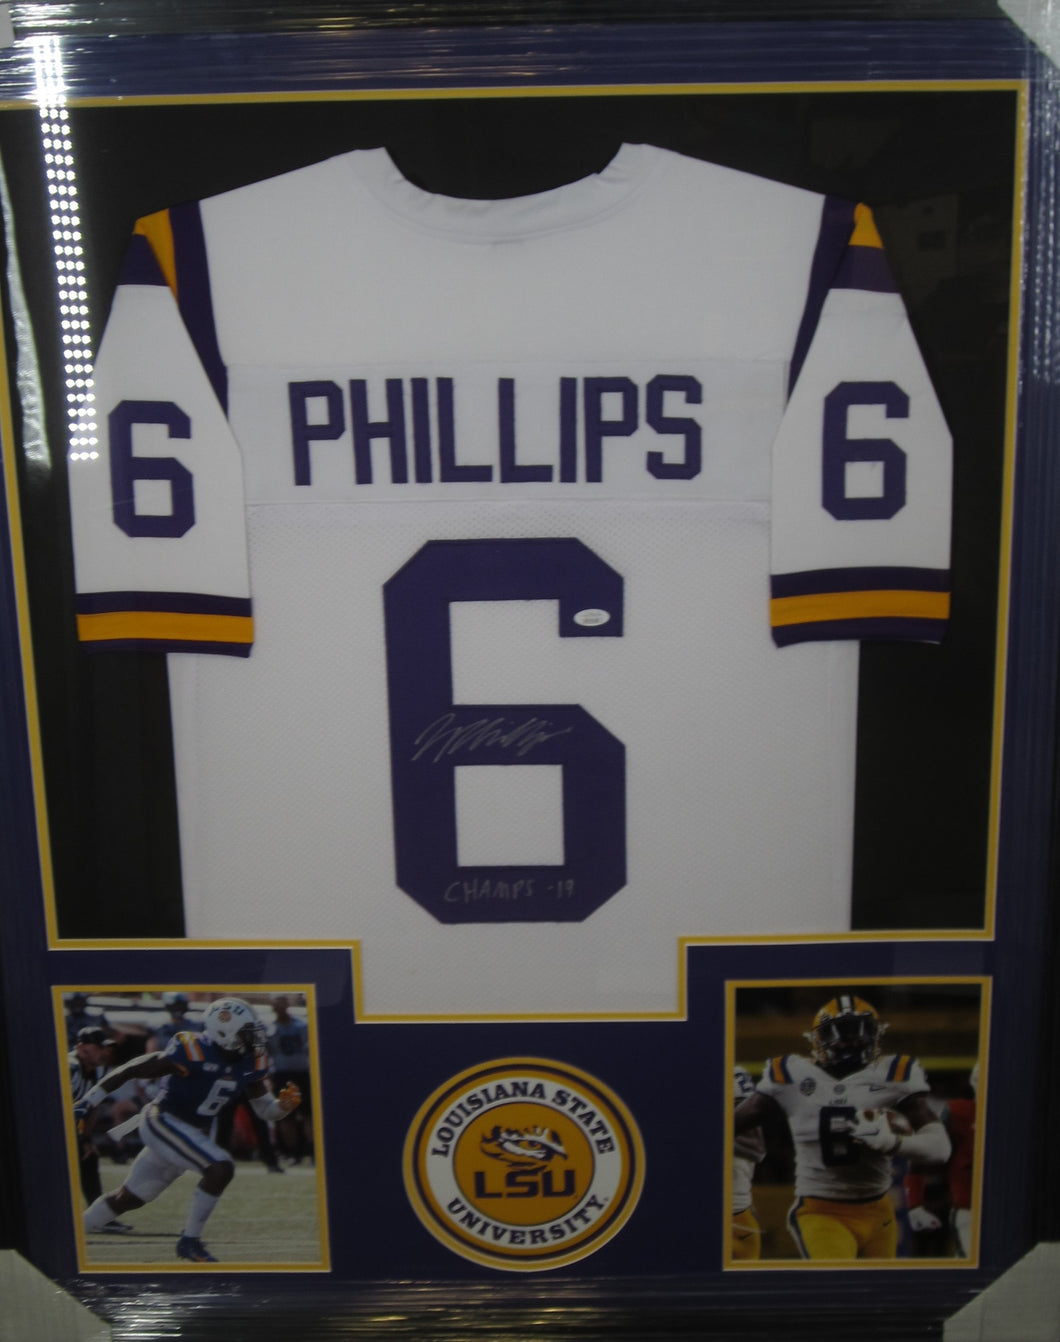 Louisiana State Tigers Jacob Phillips Signed Jersey with CHAMPS -19 Inscription Framed & Matted with JSA COA